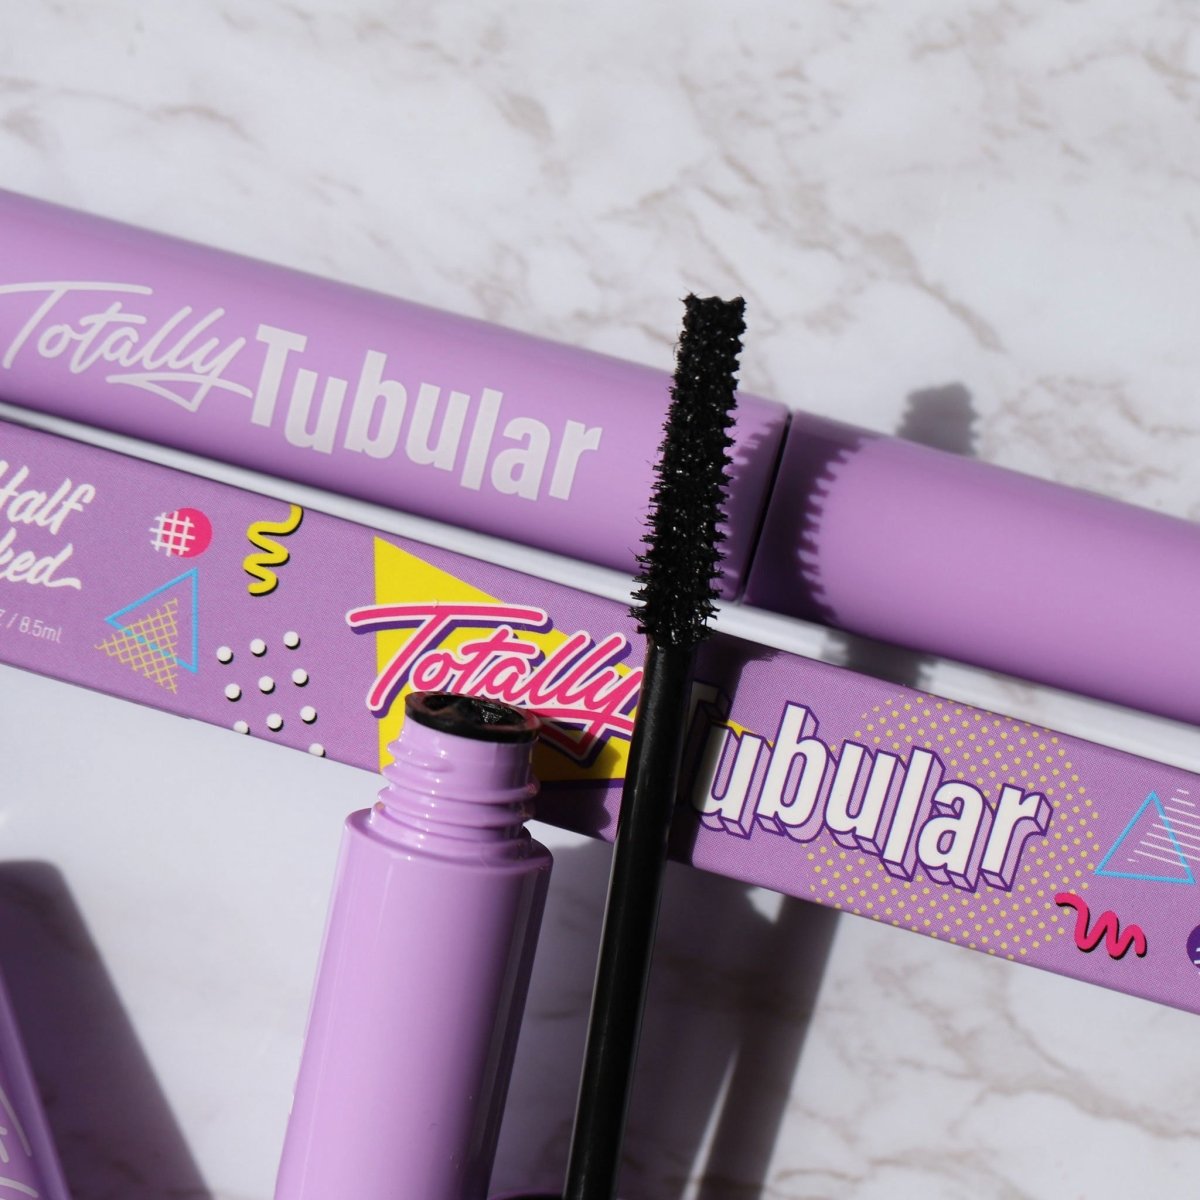 open purple mascara tube with black wire applicator - totally tubular mascara, the dream - half caked makeup